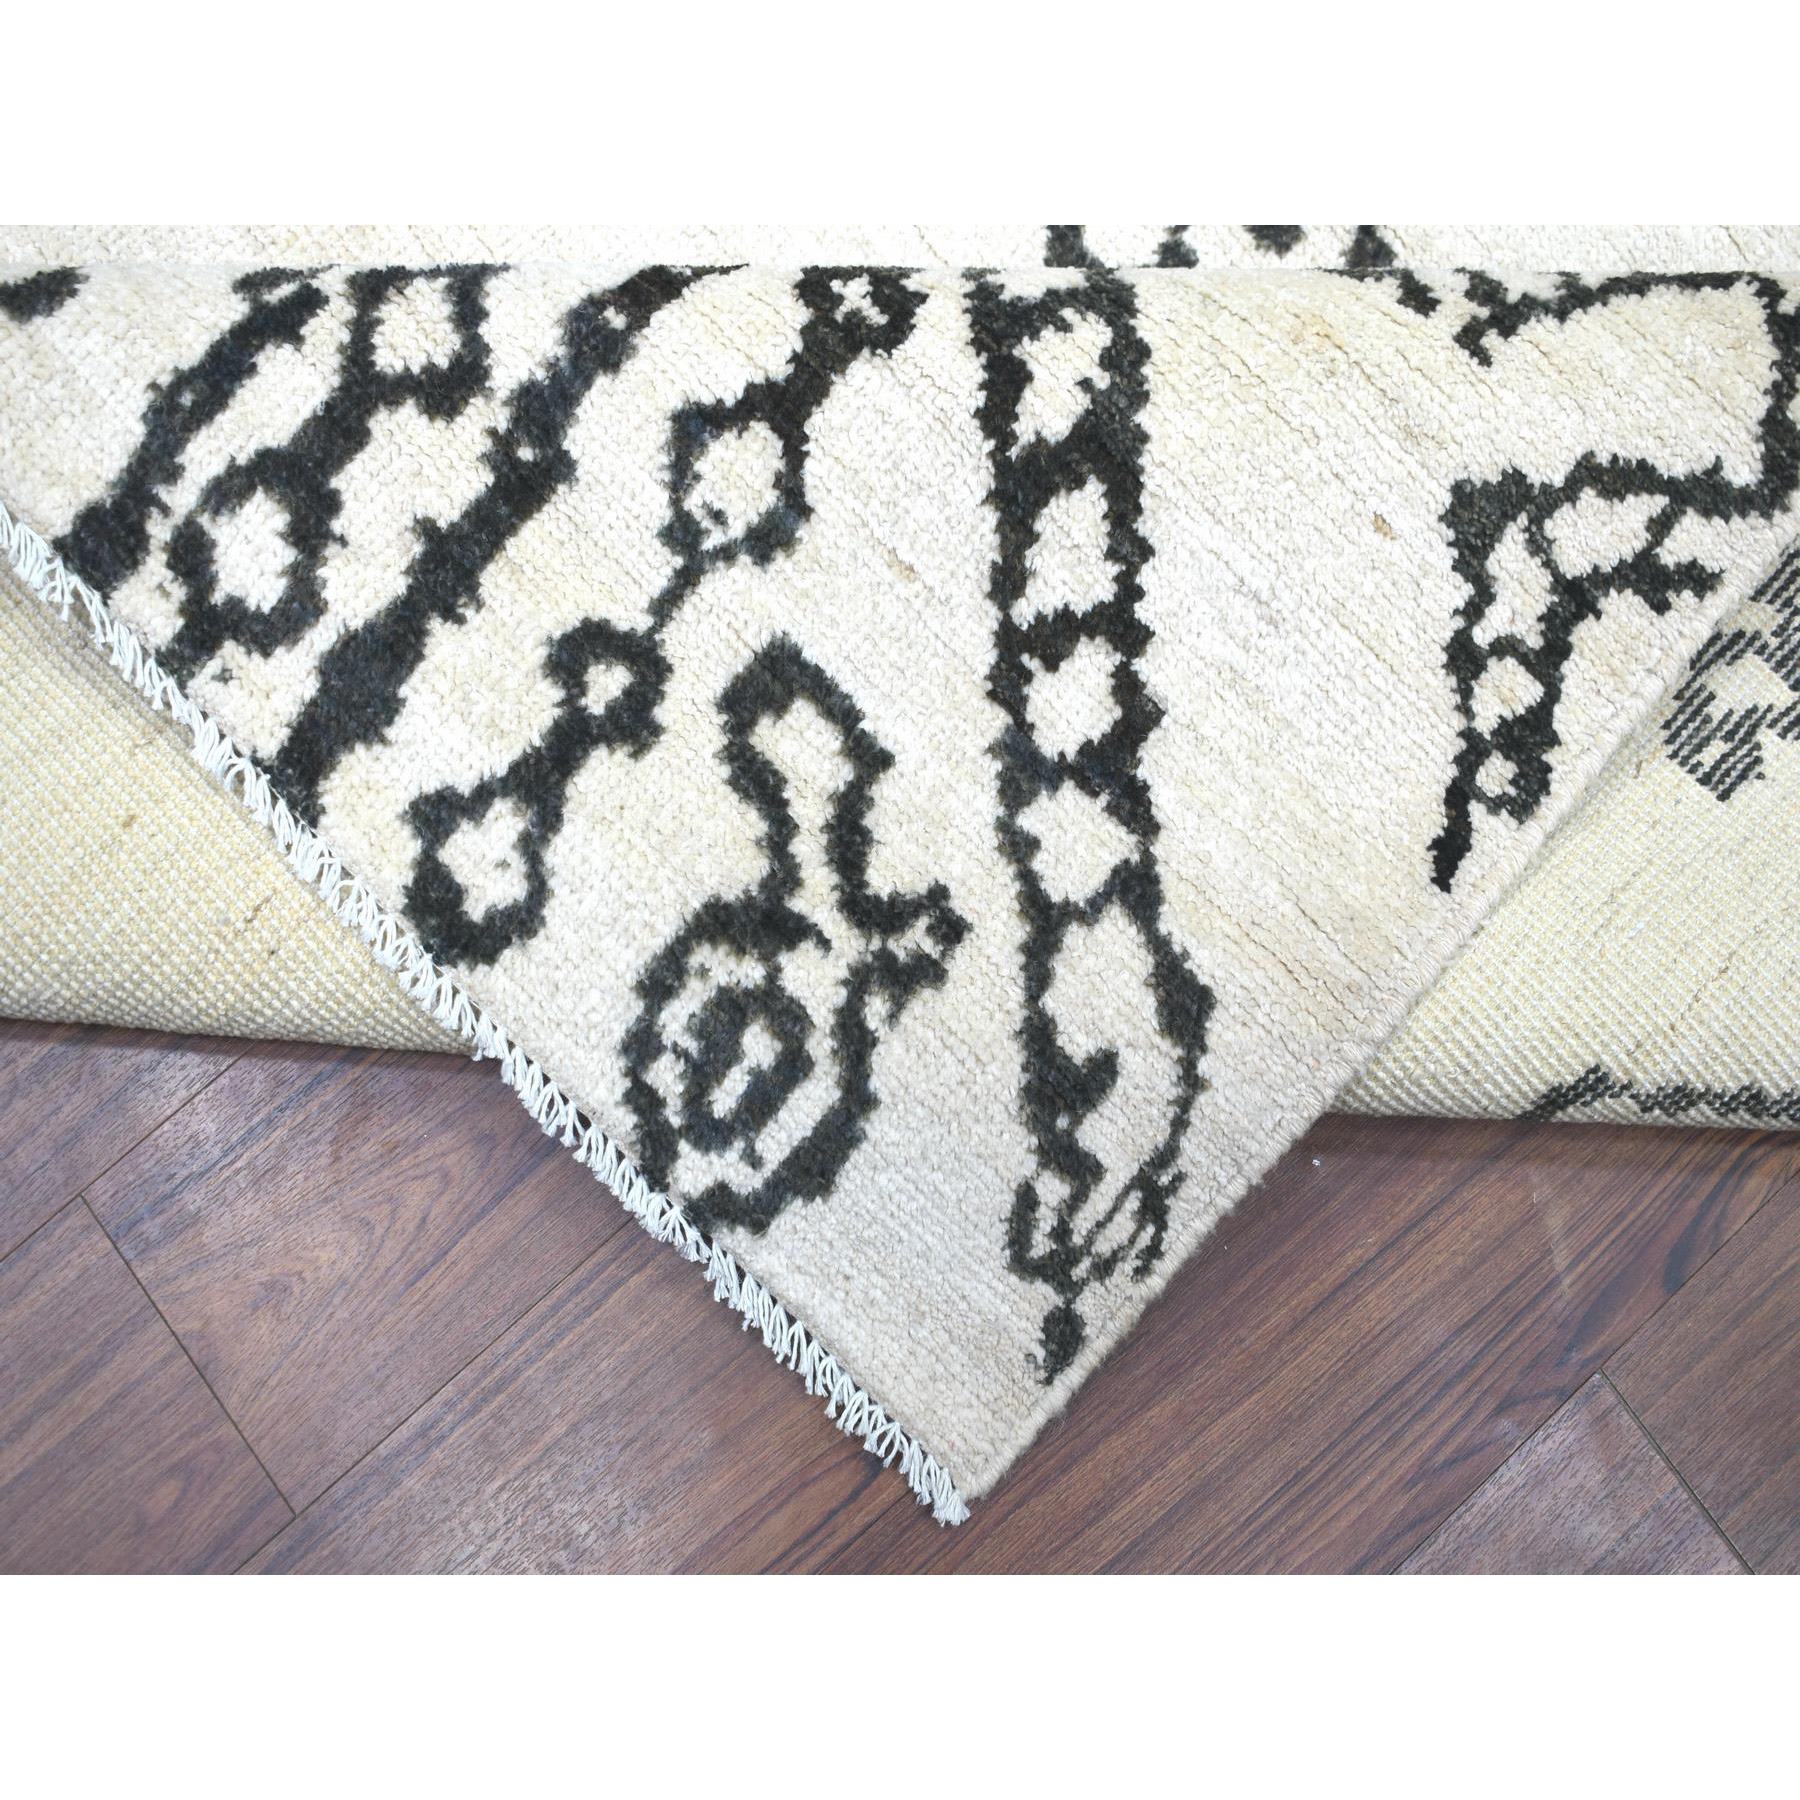 8'4"x10' Ivory, Hand Woven, Soft and Shiny Wool, Boujaad Moroccan Berber with Criss Cross Pattern, Natural Dyes, Oriental Rug 